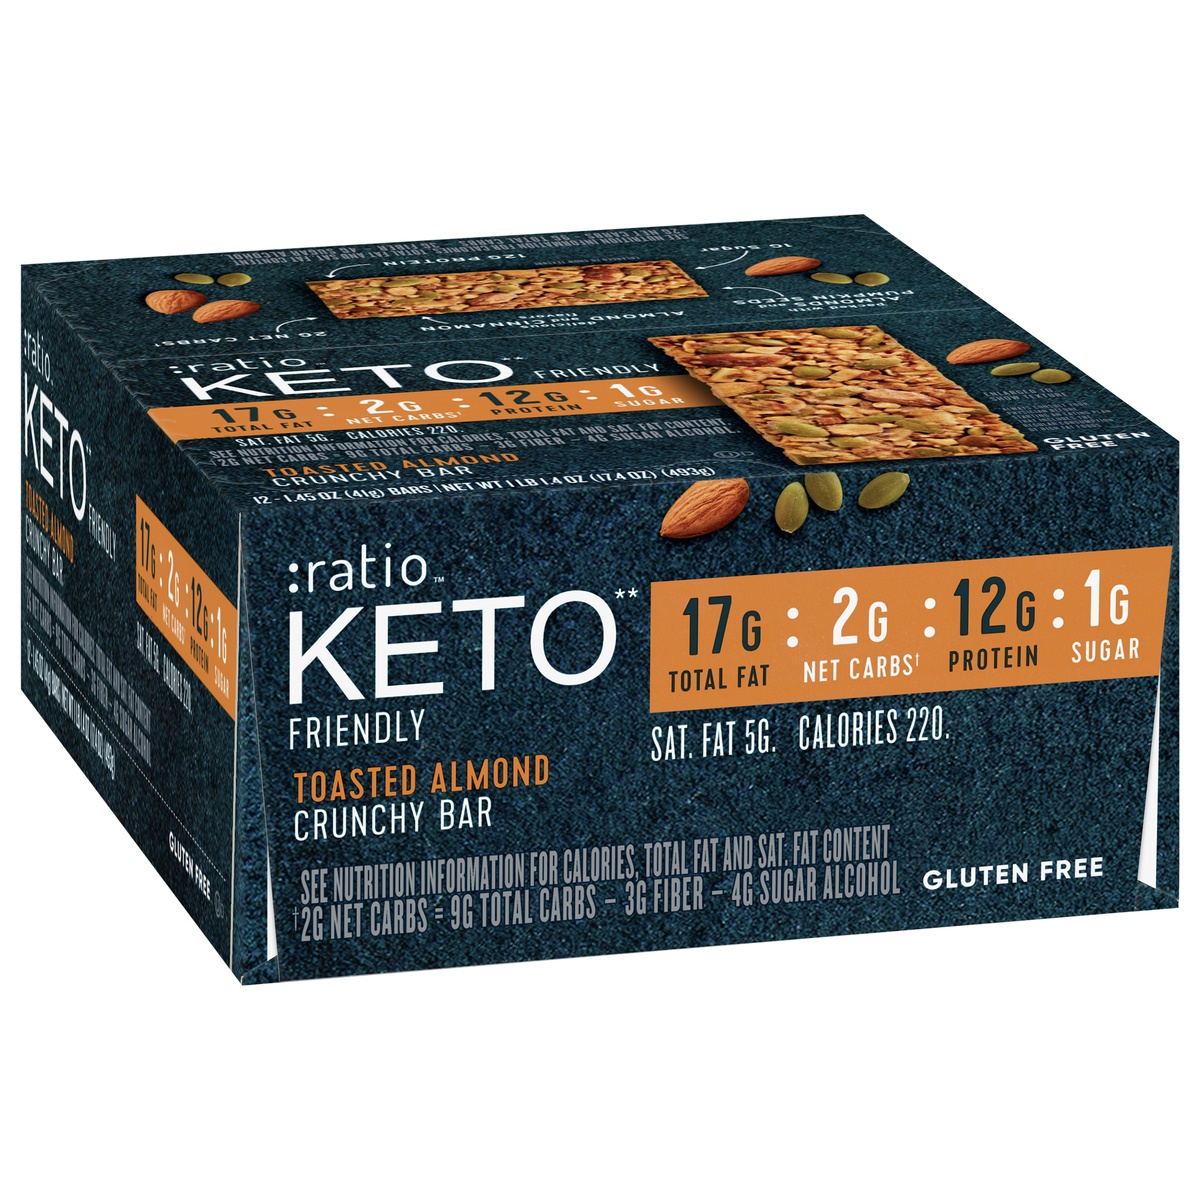 slide 2 of 11, :ratio KETO Friendly Crunchy Bars, Toasted Almond, Gluten Free Snack, 12 ct, 17.4 oz